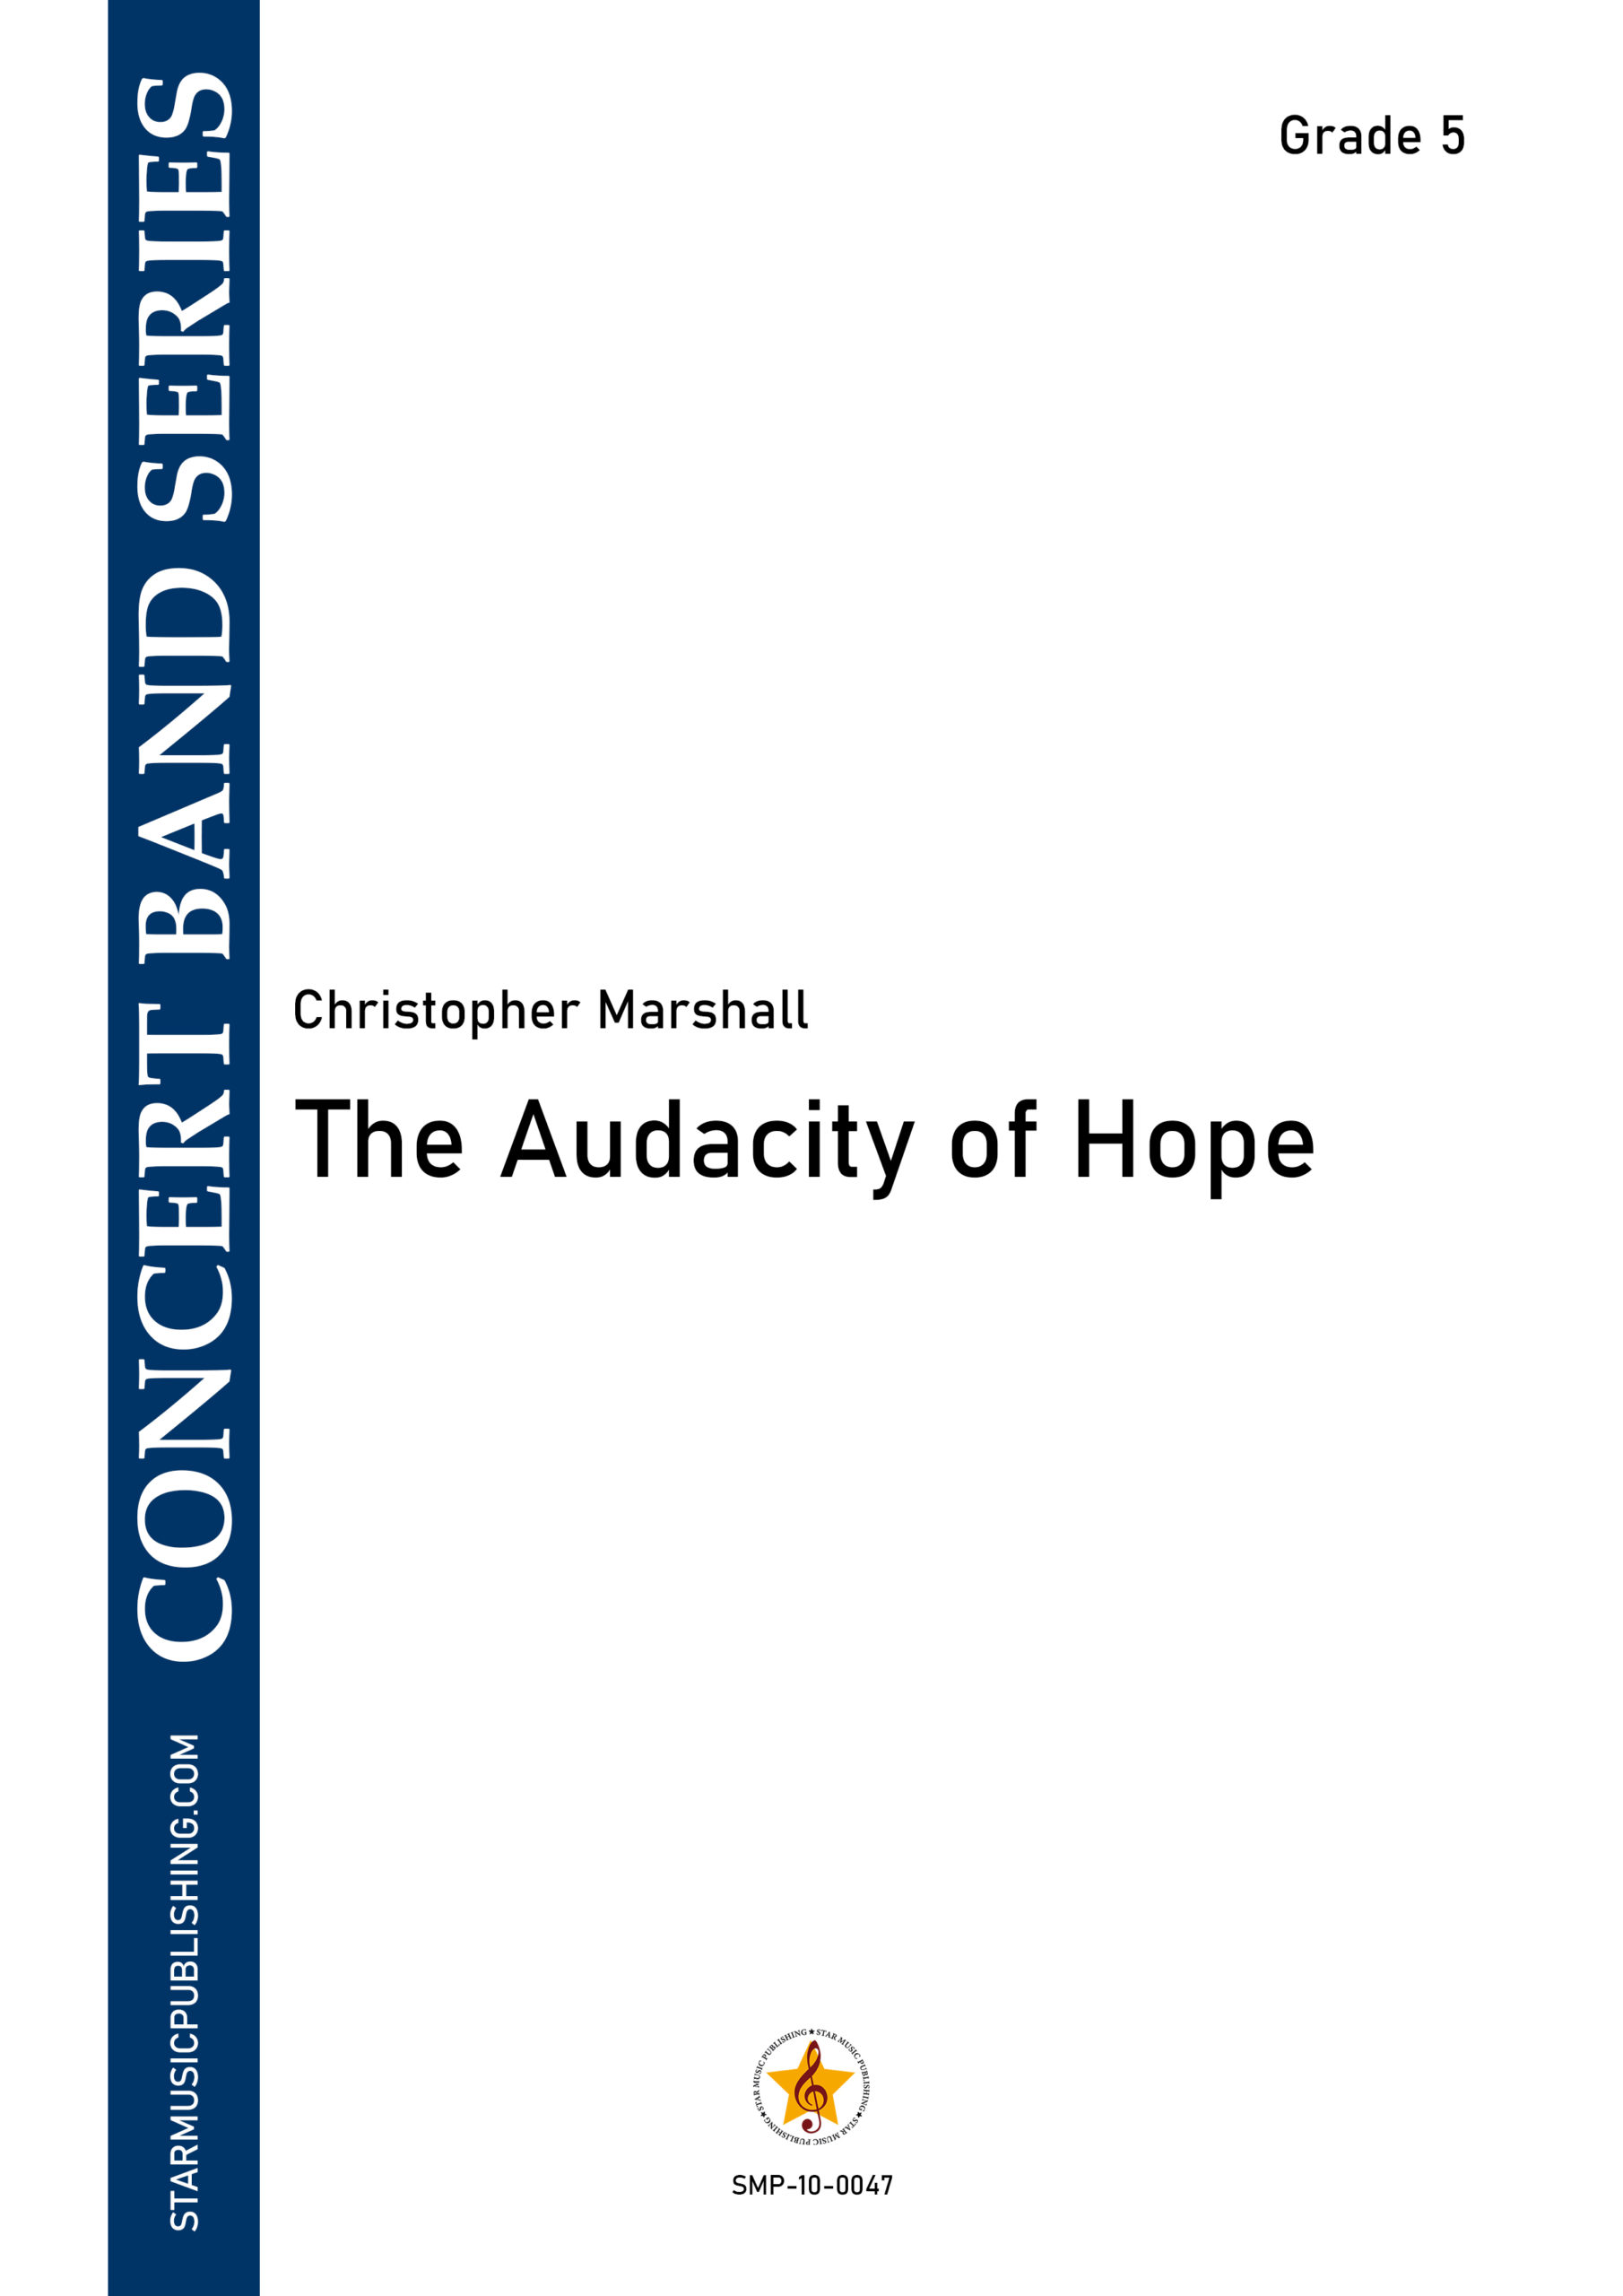 The Audacity of Hope by Christopher Marshall Star Music Publishing